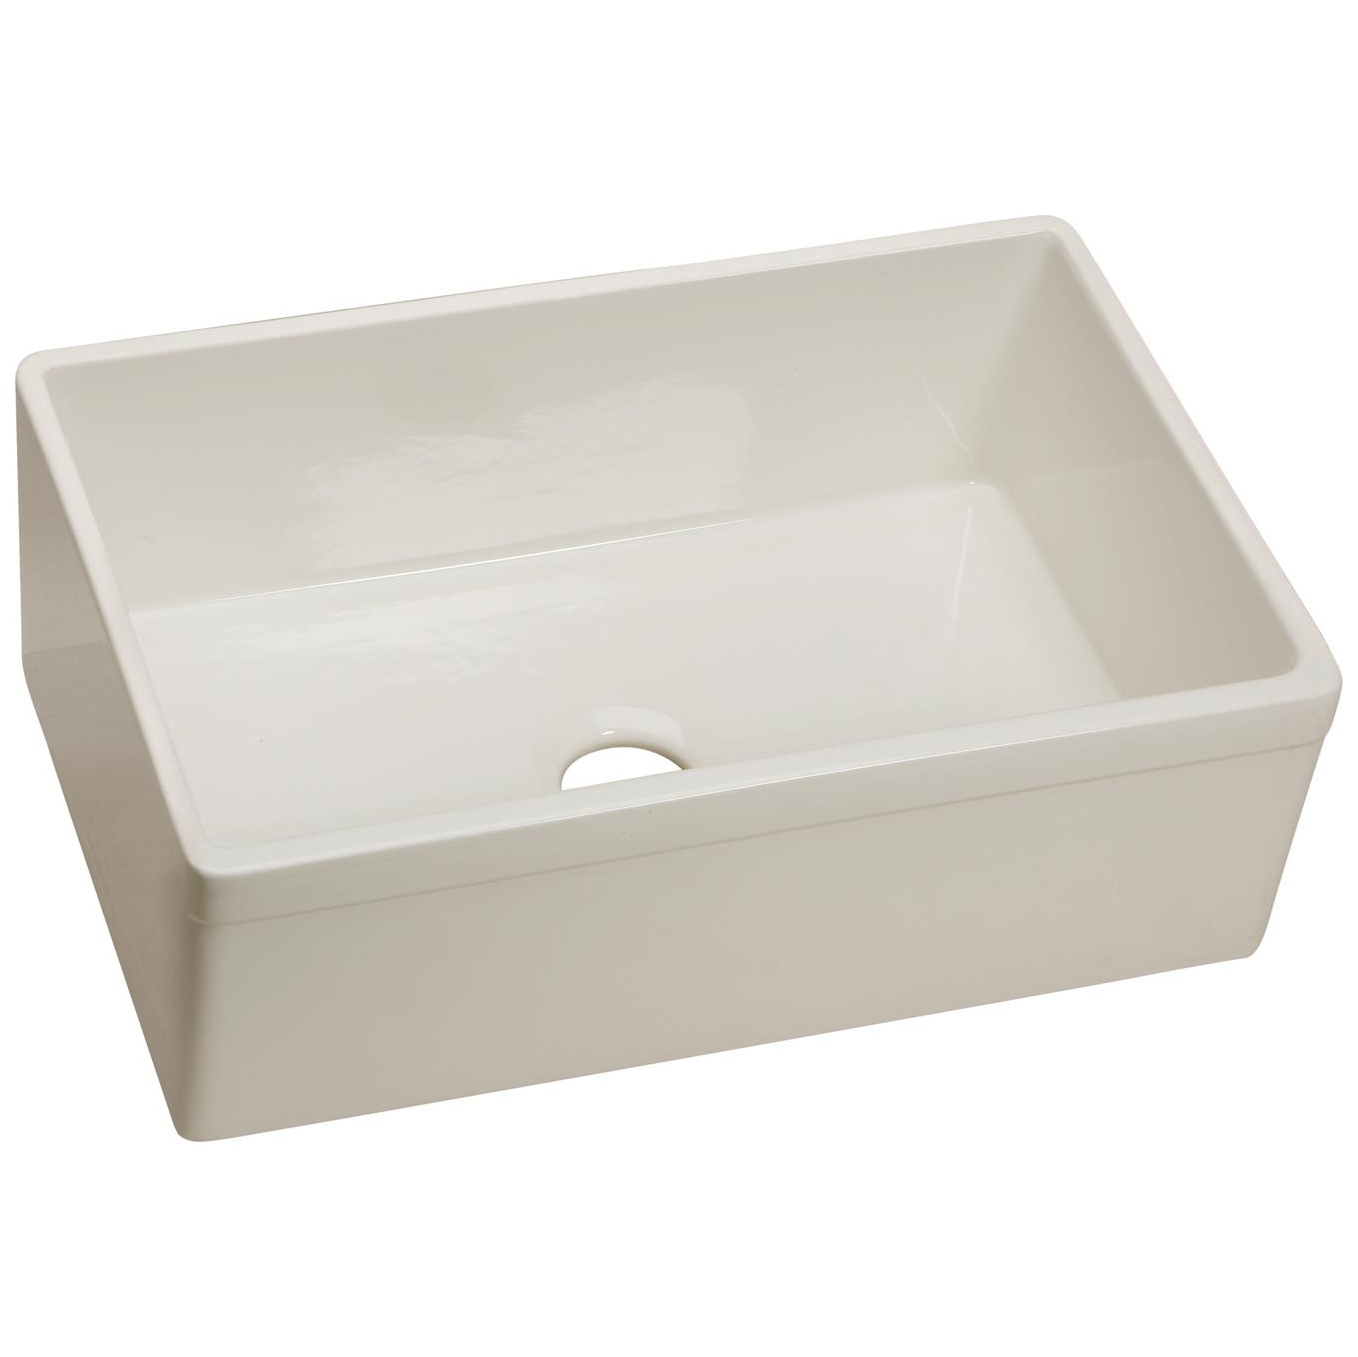 29-7/8x19-3/4x10-1/16" Fireclay Farmhouse Sink in Biscuit